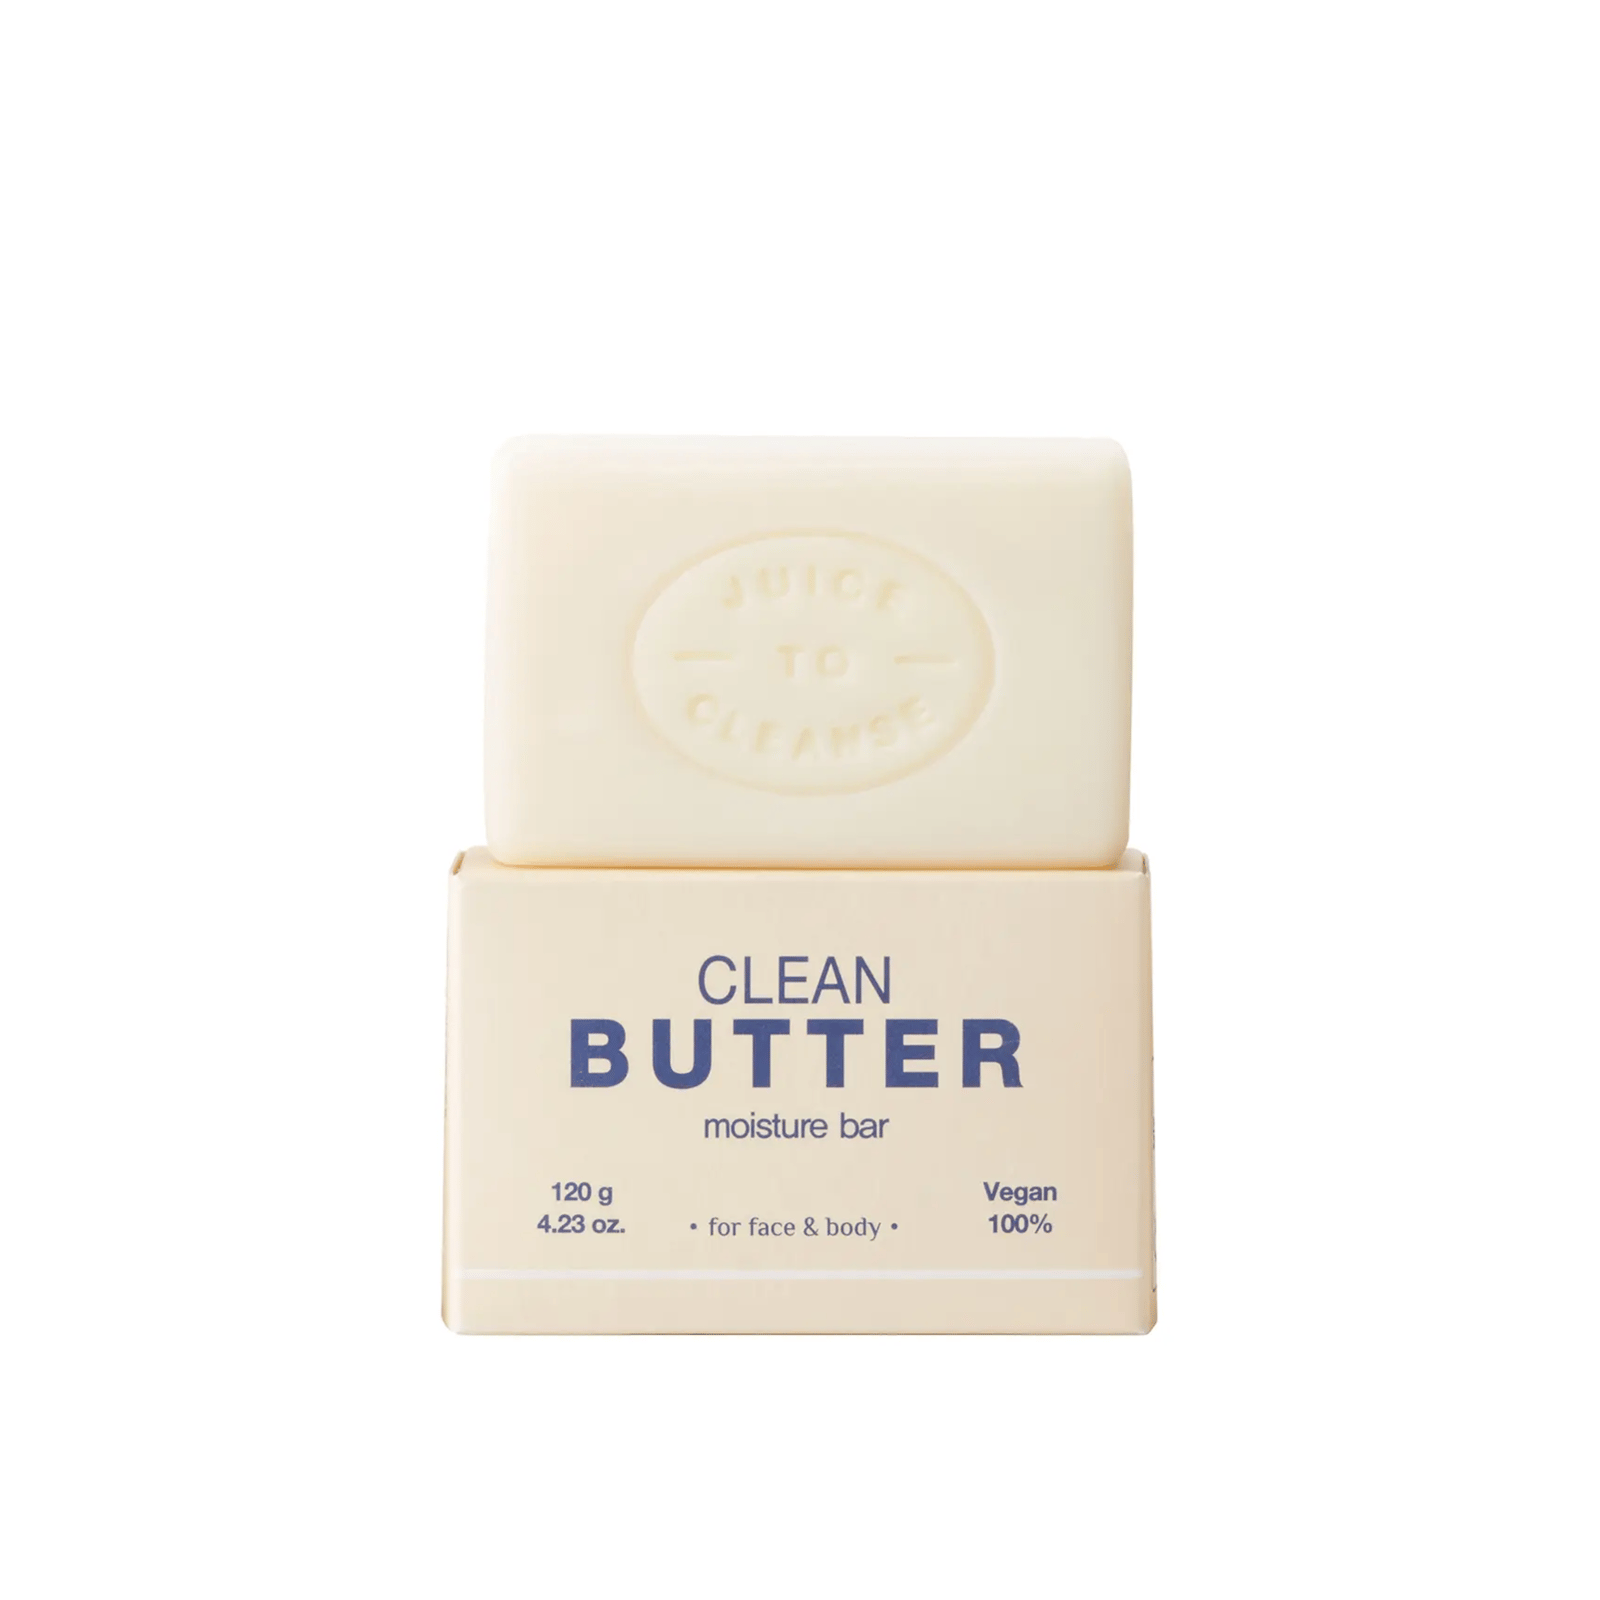 Juice to Cleanse Clean Butter Moisture Bar 120g (4.23 oz)